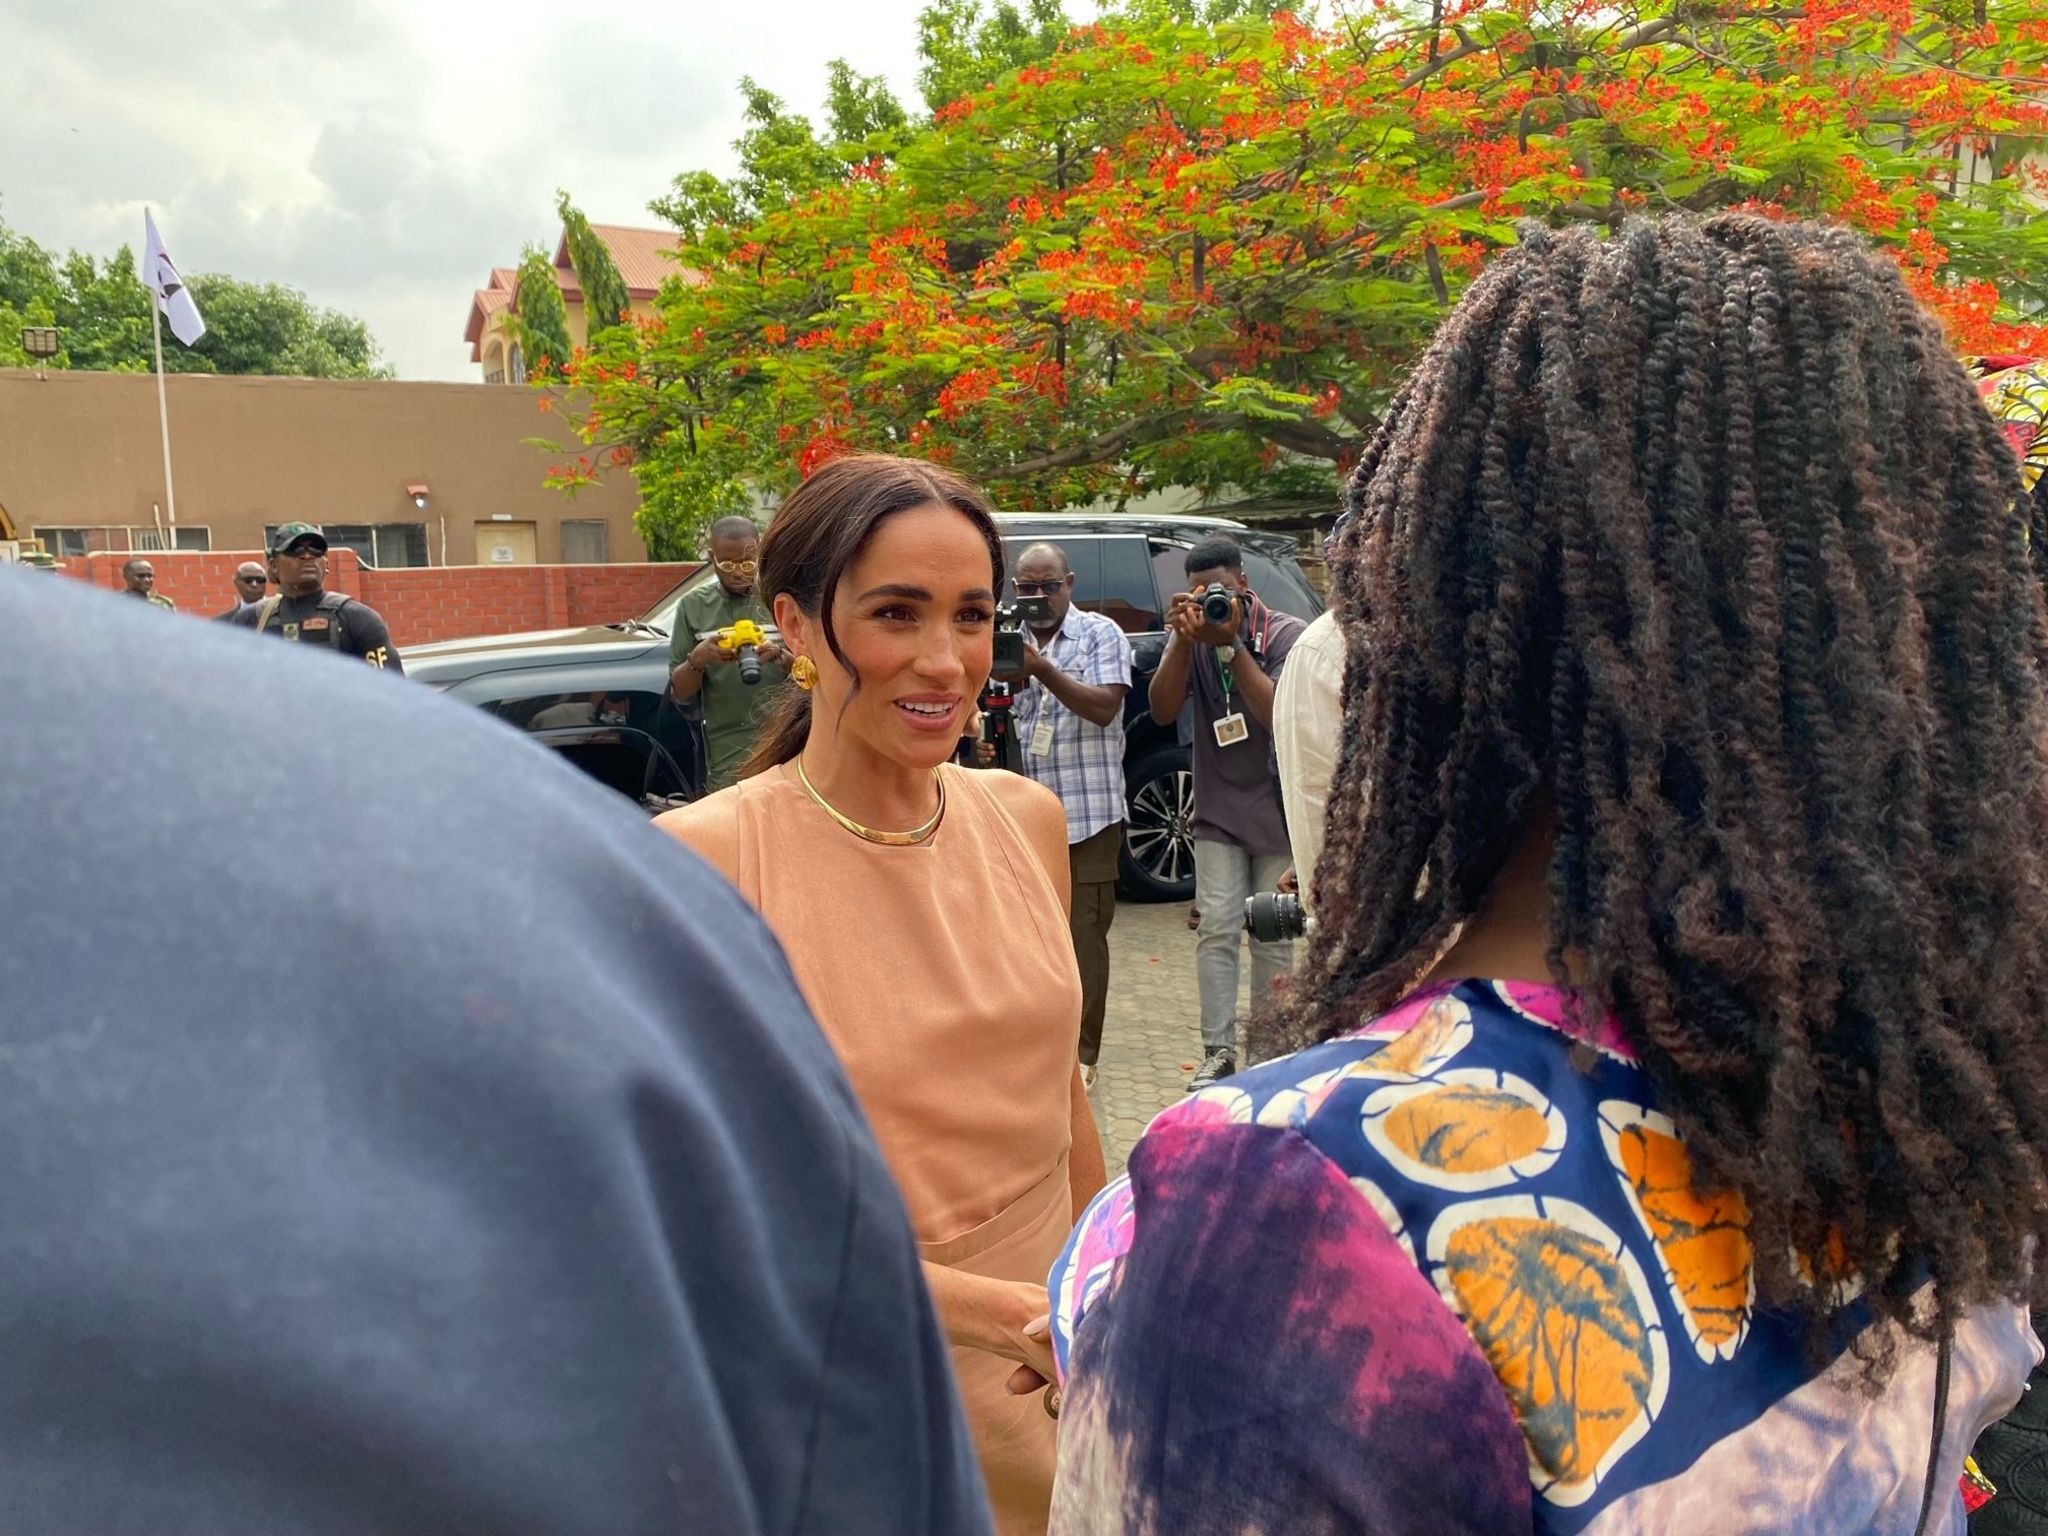 Meghan Duchess of Sussex greeting two people with a line of photographers behind her